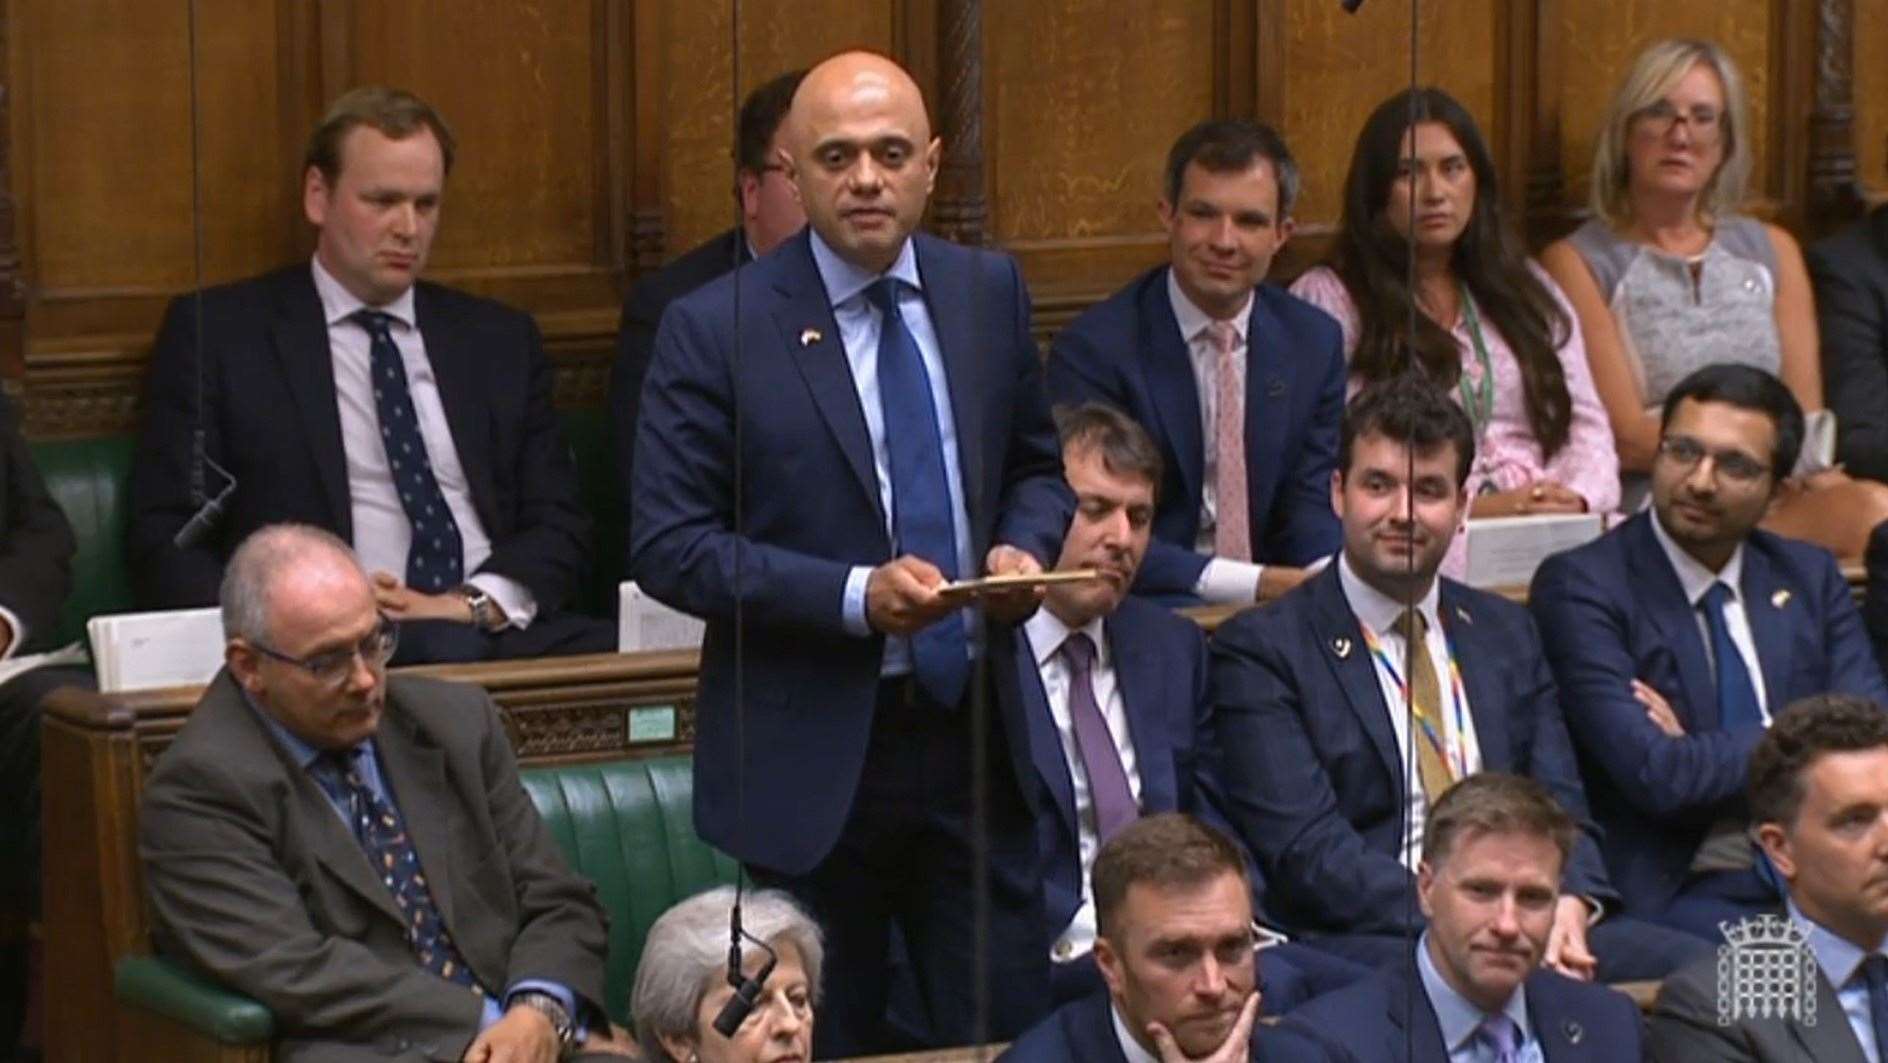 Sajid Javid delivers a personal statement to the House of Commons (House of Commons/PA)